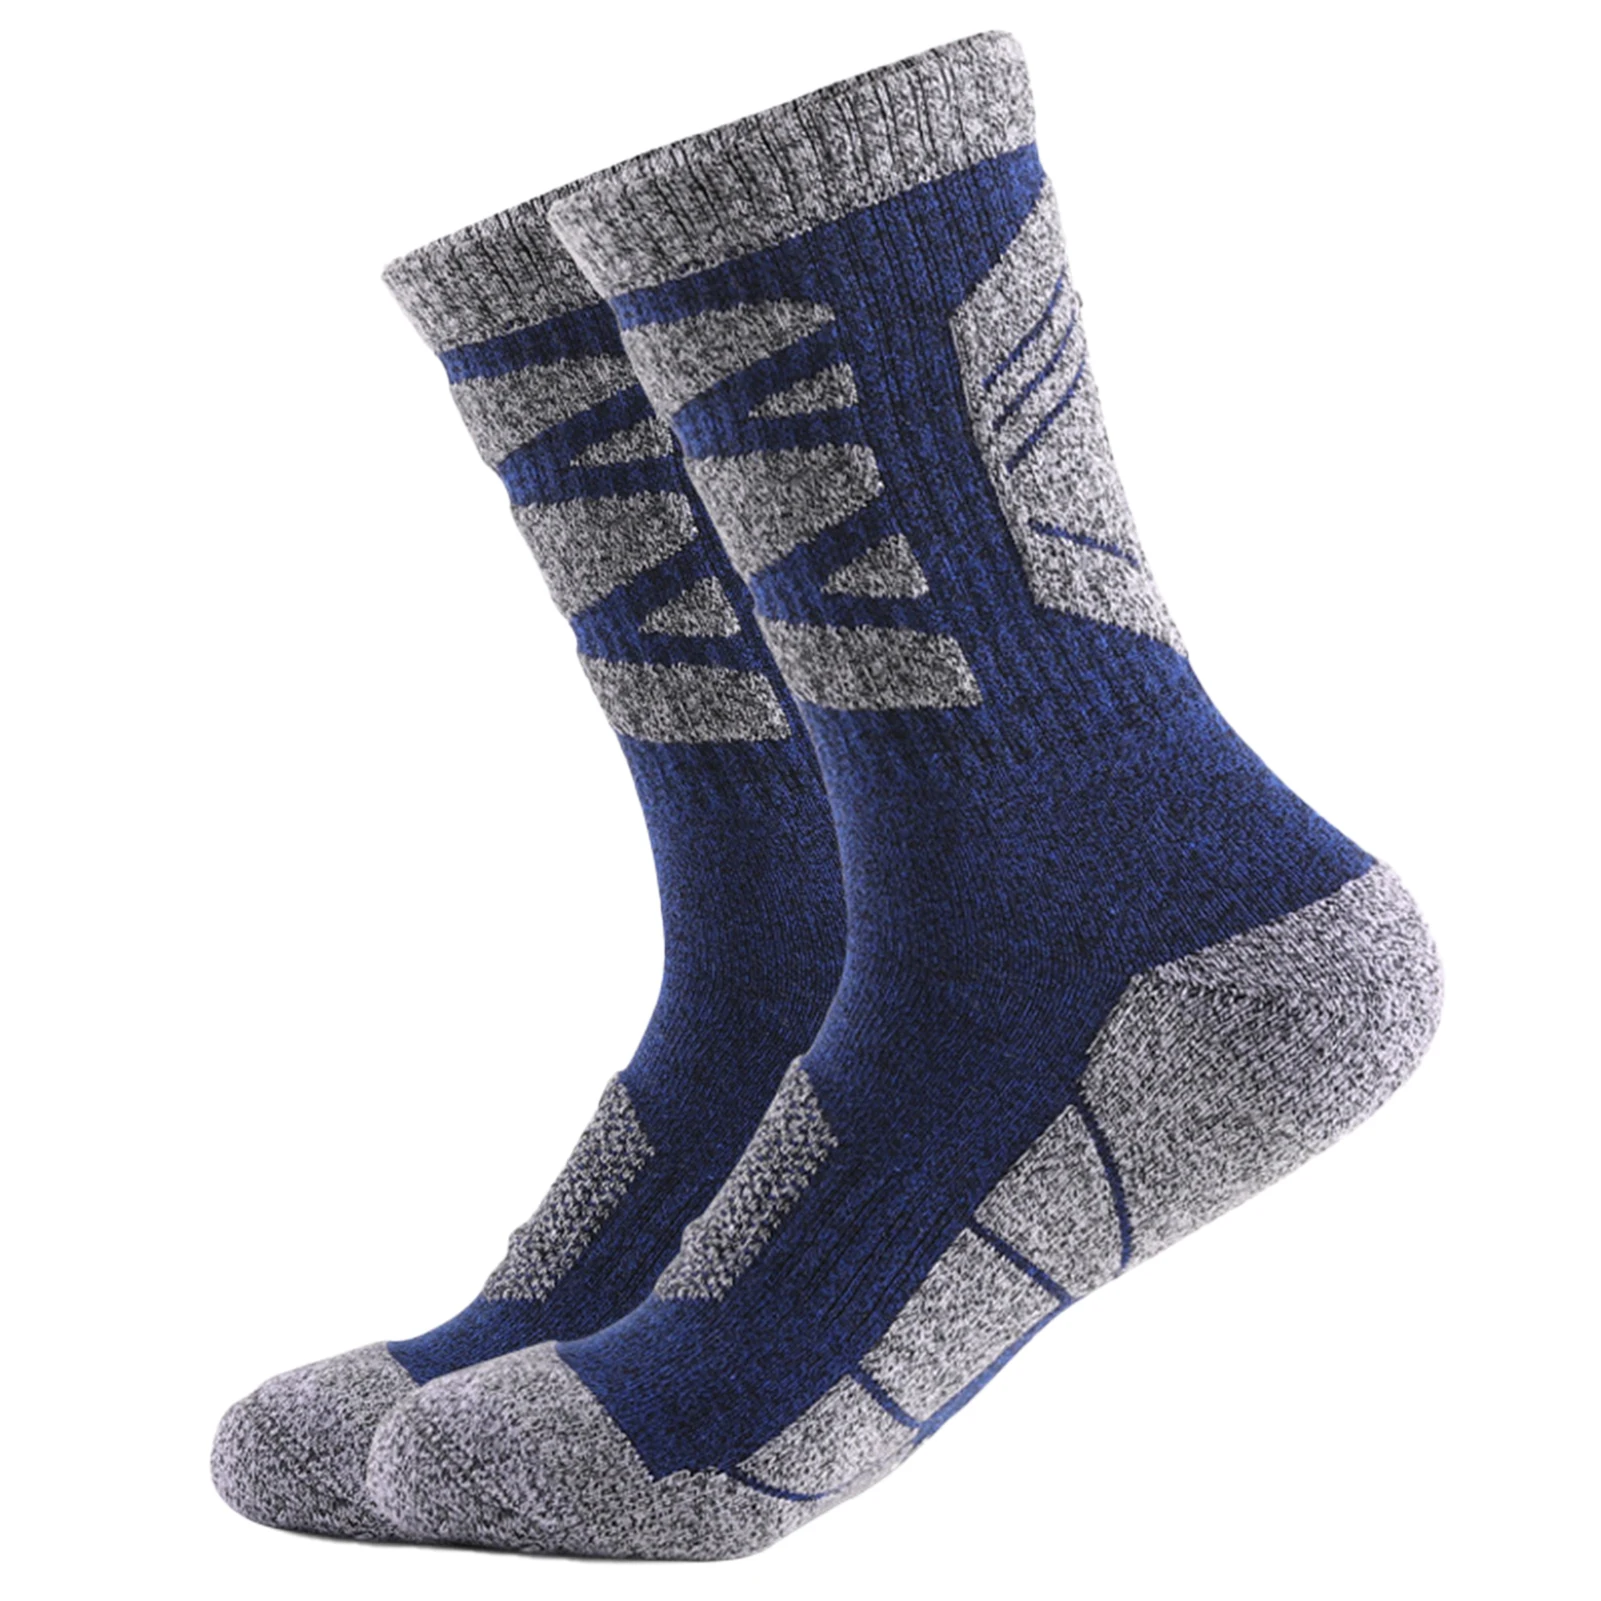 

5 Pairs Winter Crew Socks Thick Knitting Terry Bottom Warm and Moisture Control Ankle Socks for Men Women Cold Outdoor ASD88